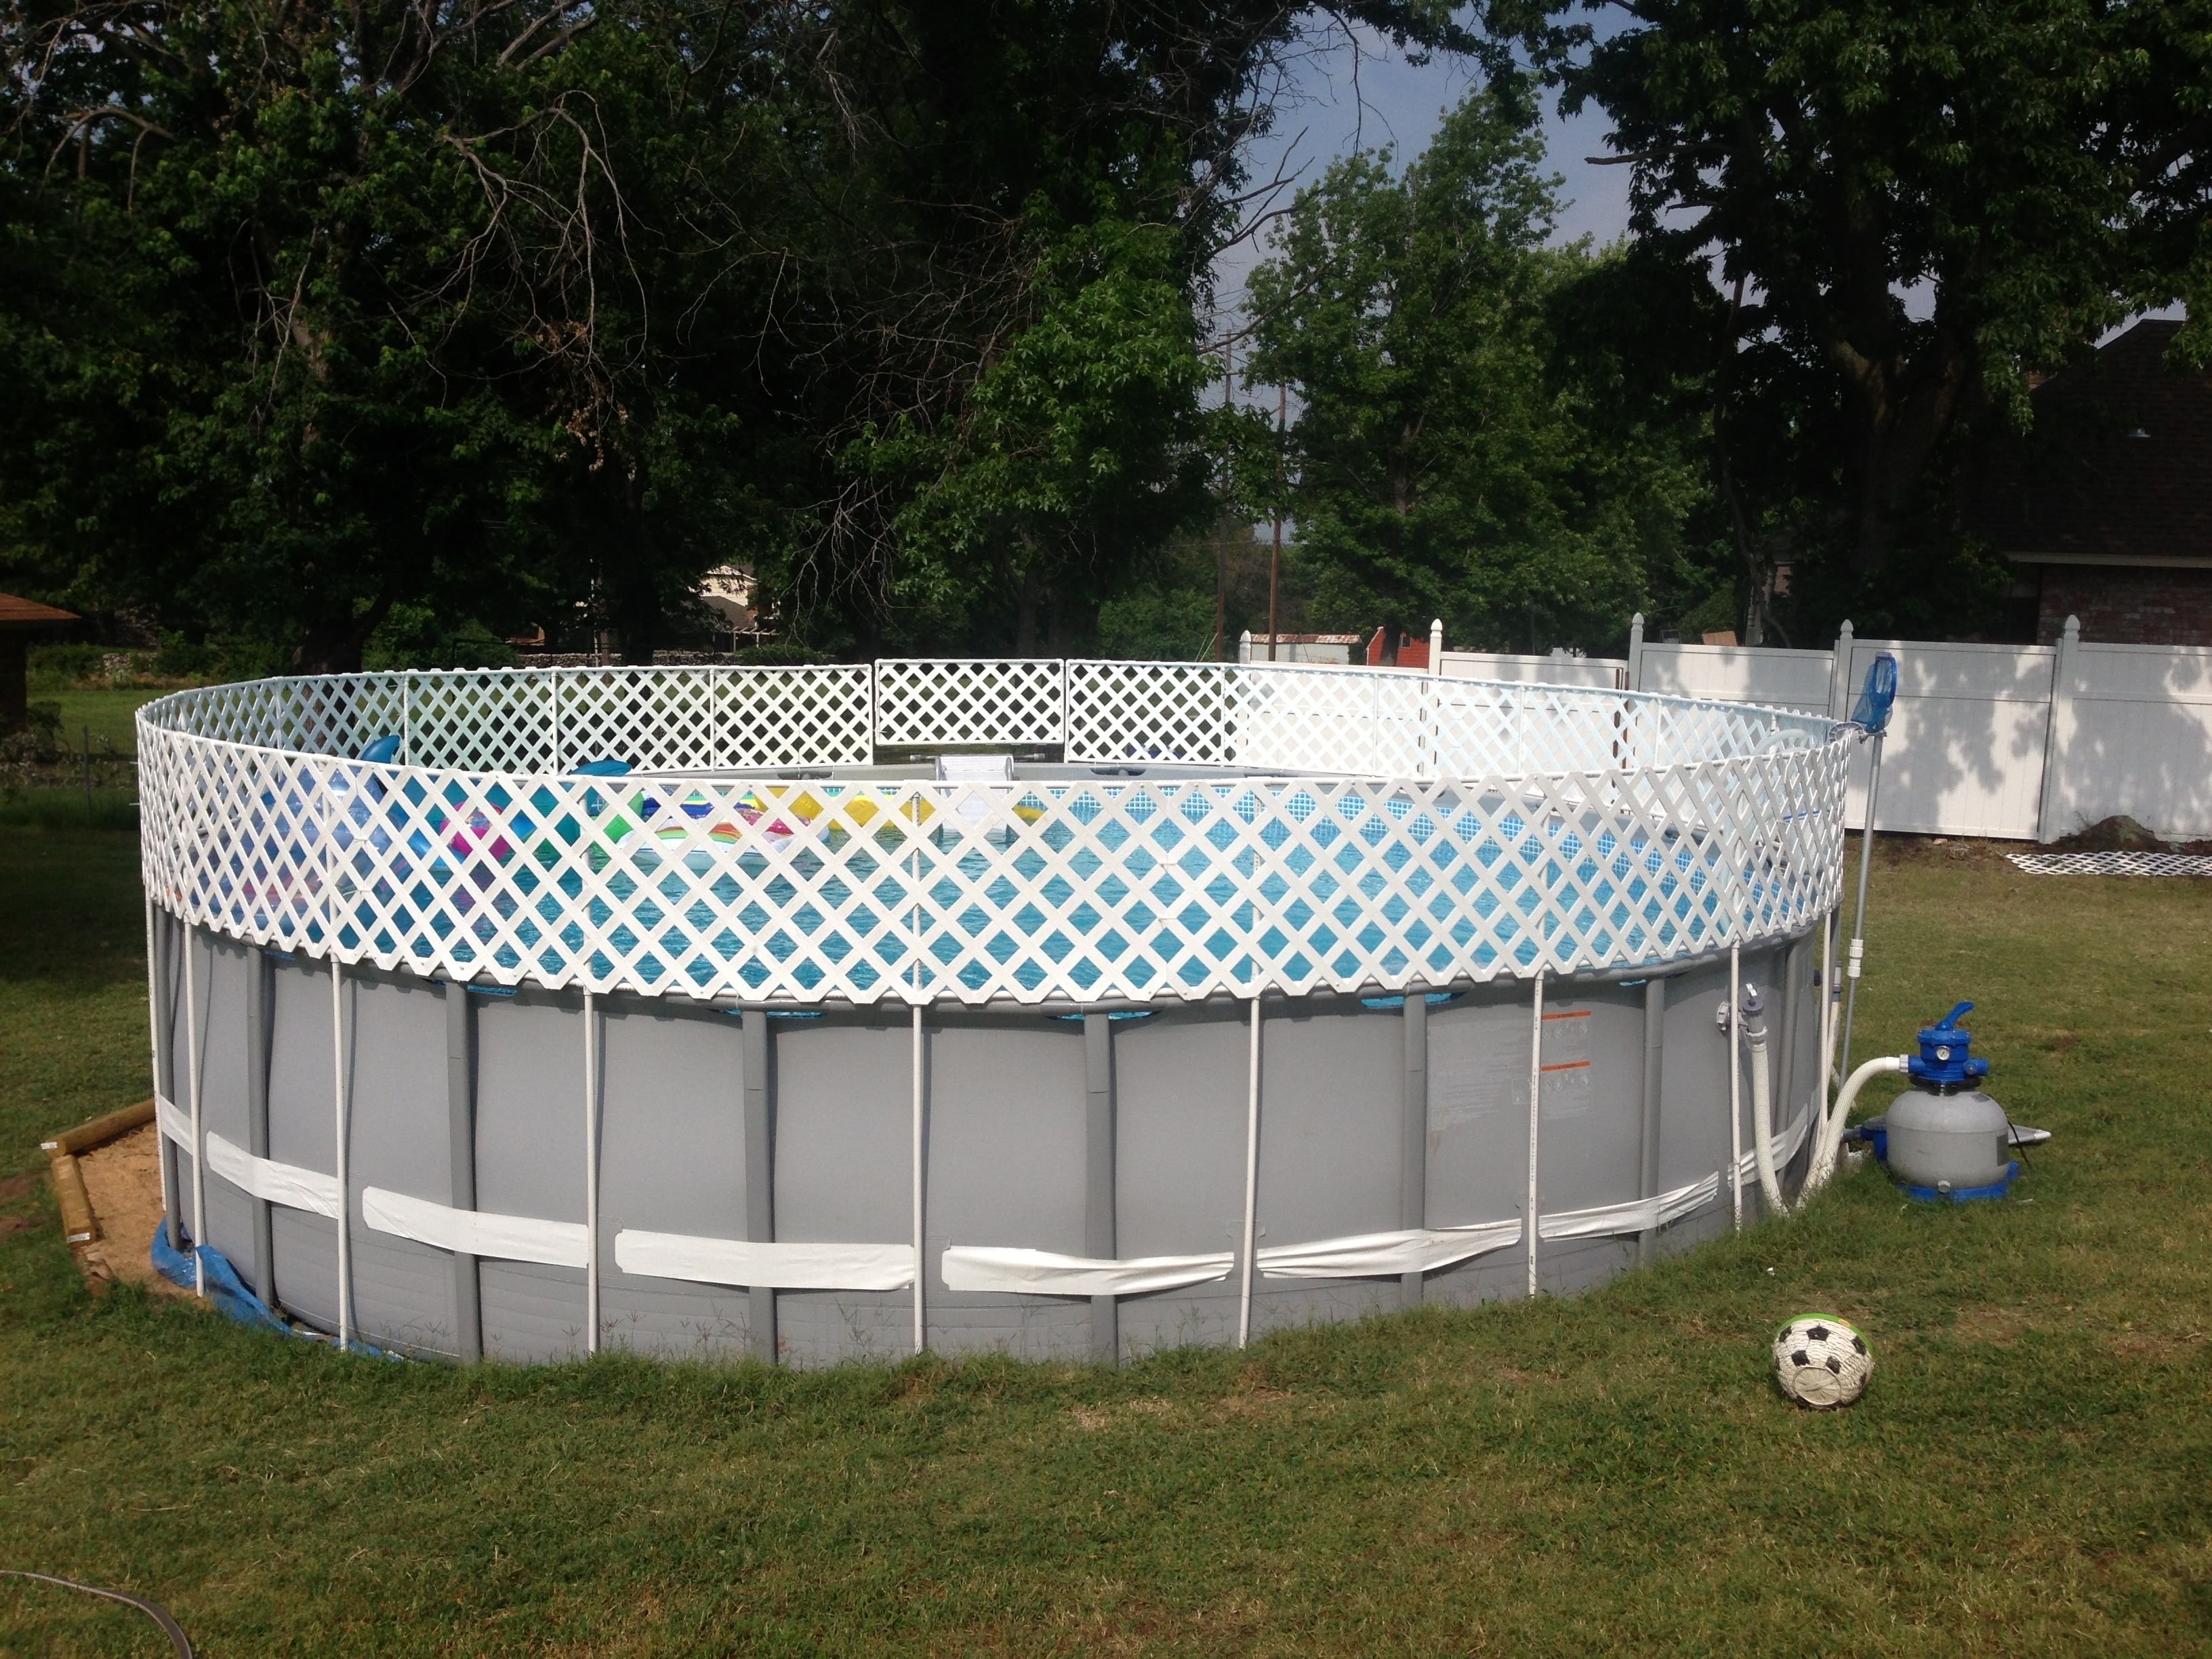 10 Unique Above Ground Pool Fencing Ideas above ground pool fence diy 1 2inch pvc pipe and white pvc lattice 2022